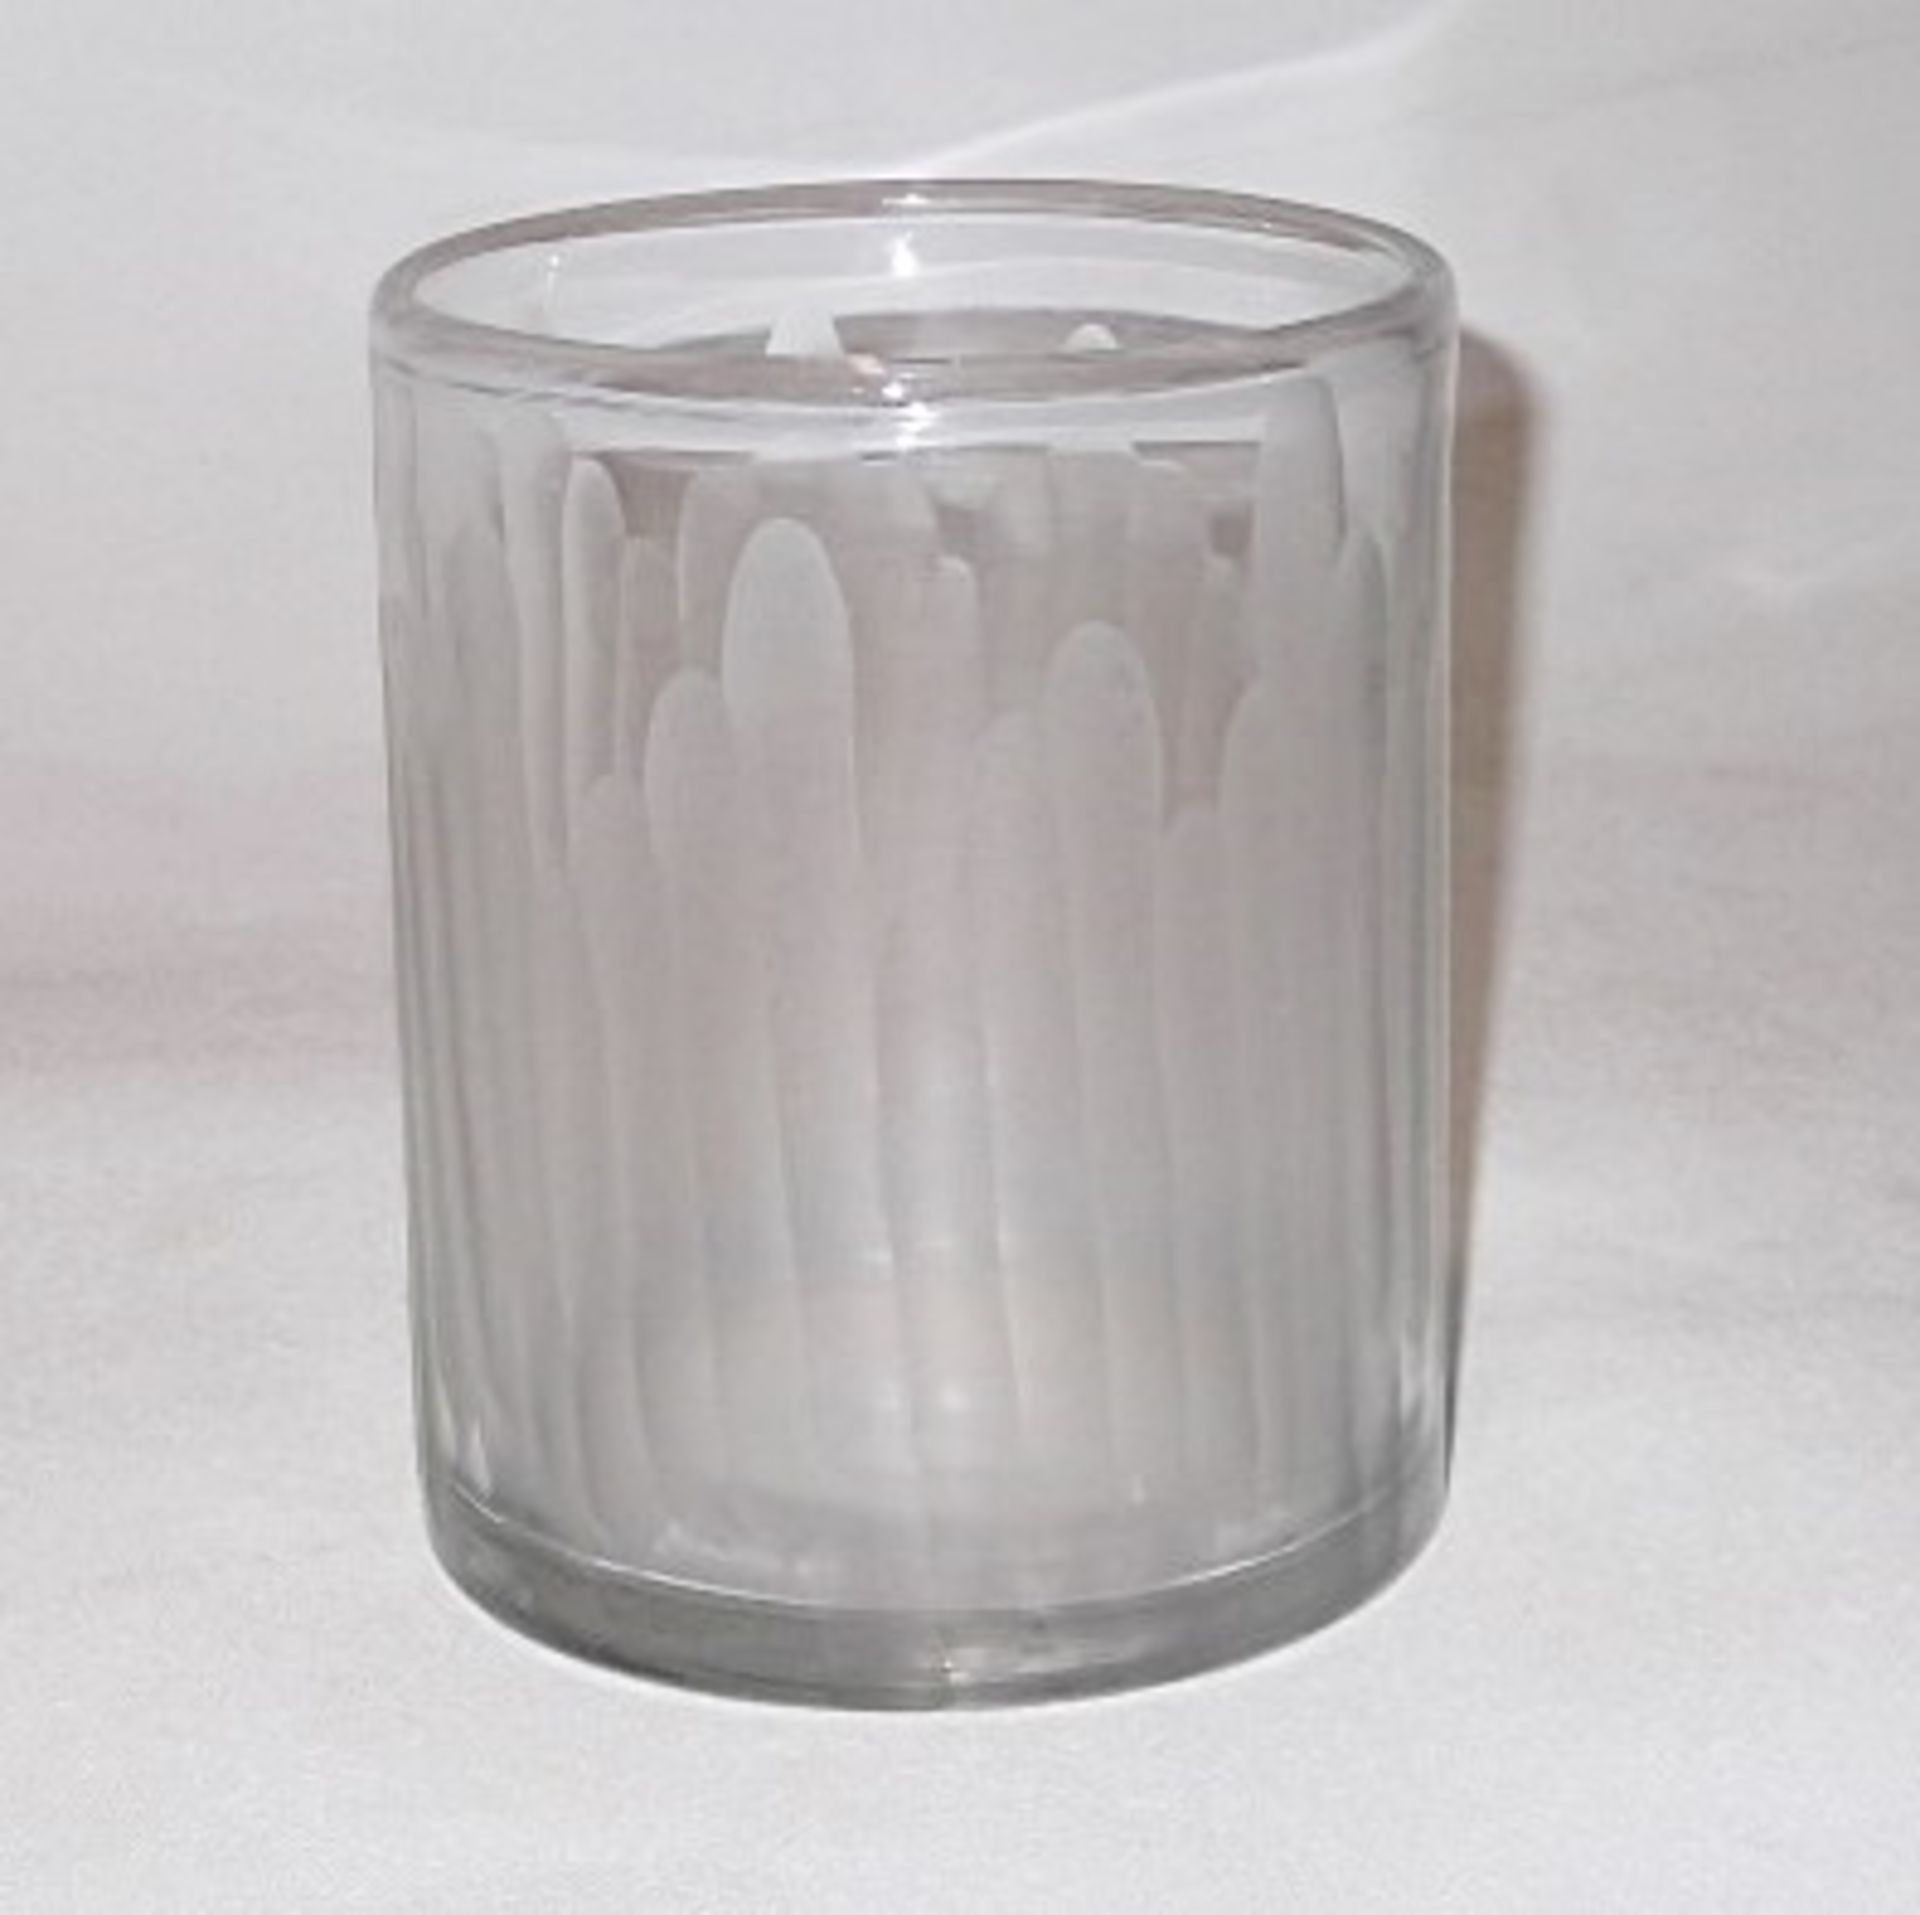 4 x EICHHOLTZ BV "Astor" Frosted Glass Tealight Holders  - Ref: 3353730 - CL087 - Location: - Image 4 of 4